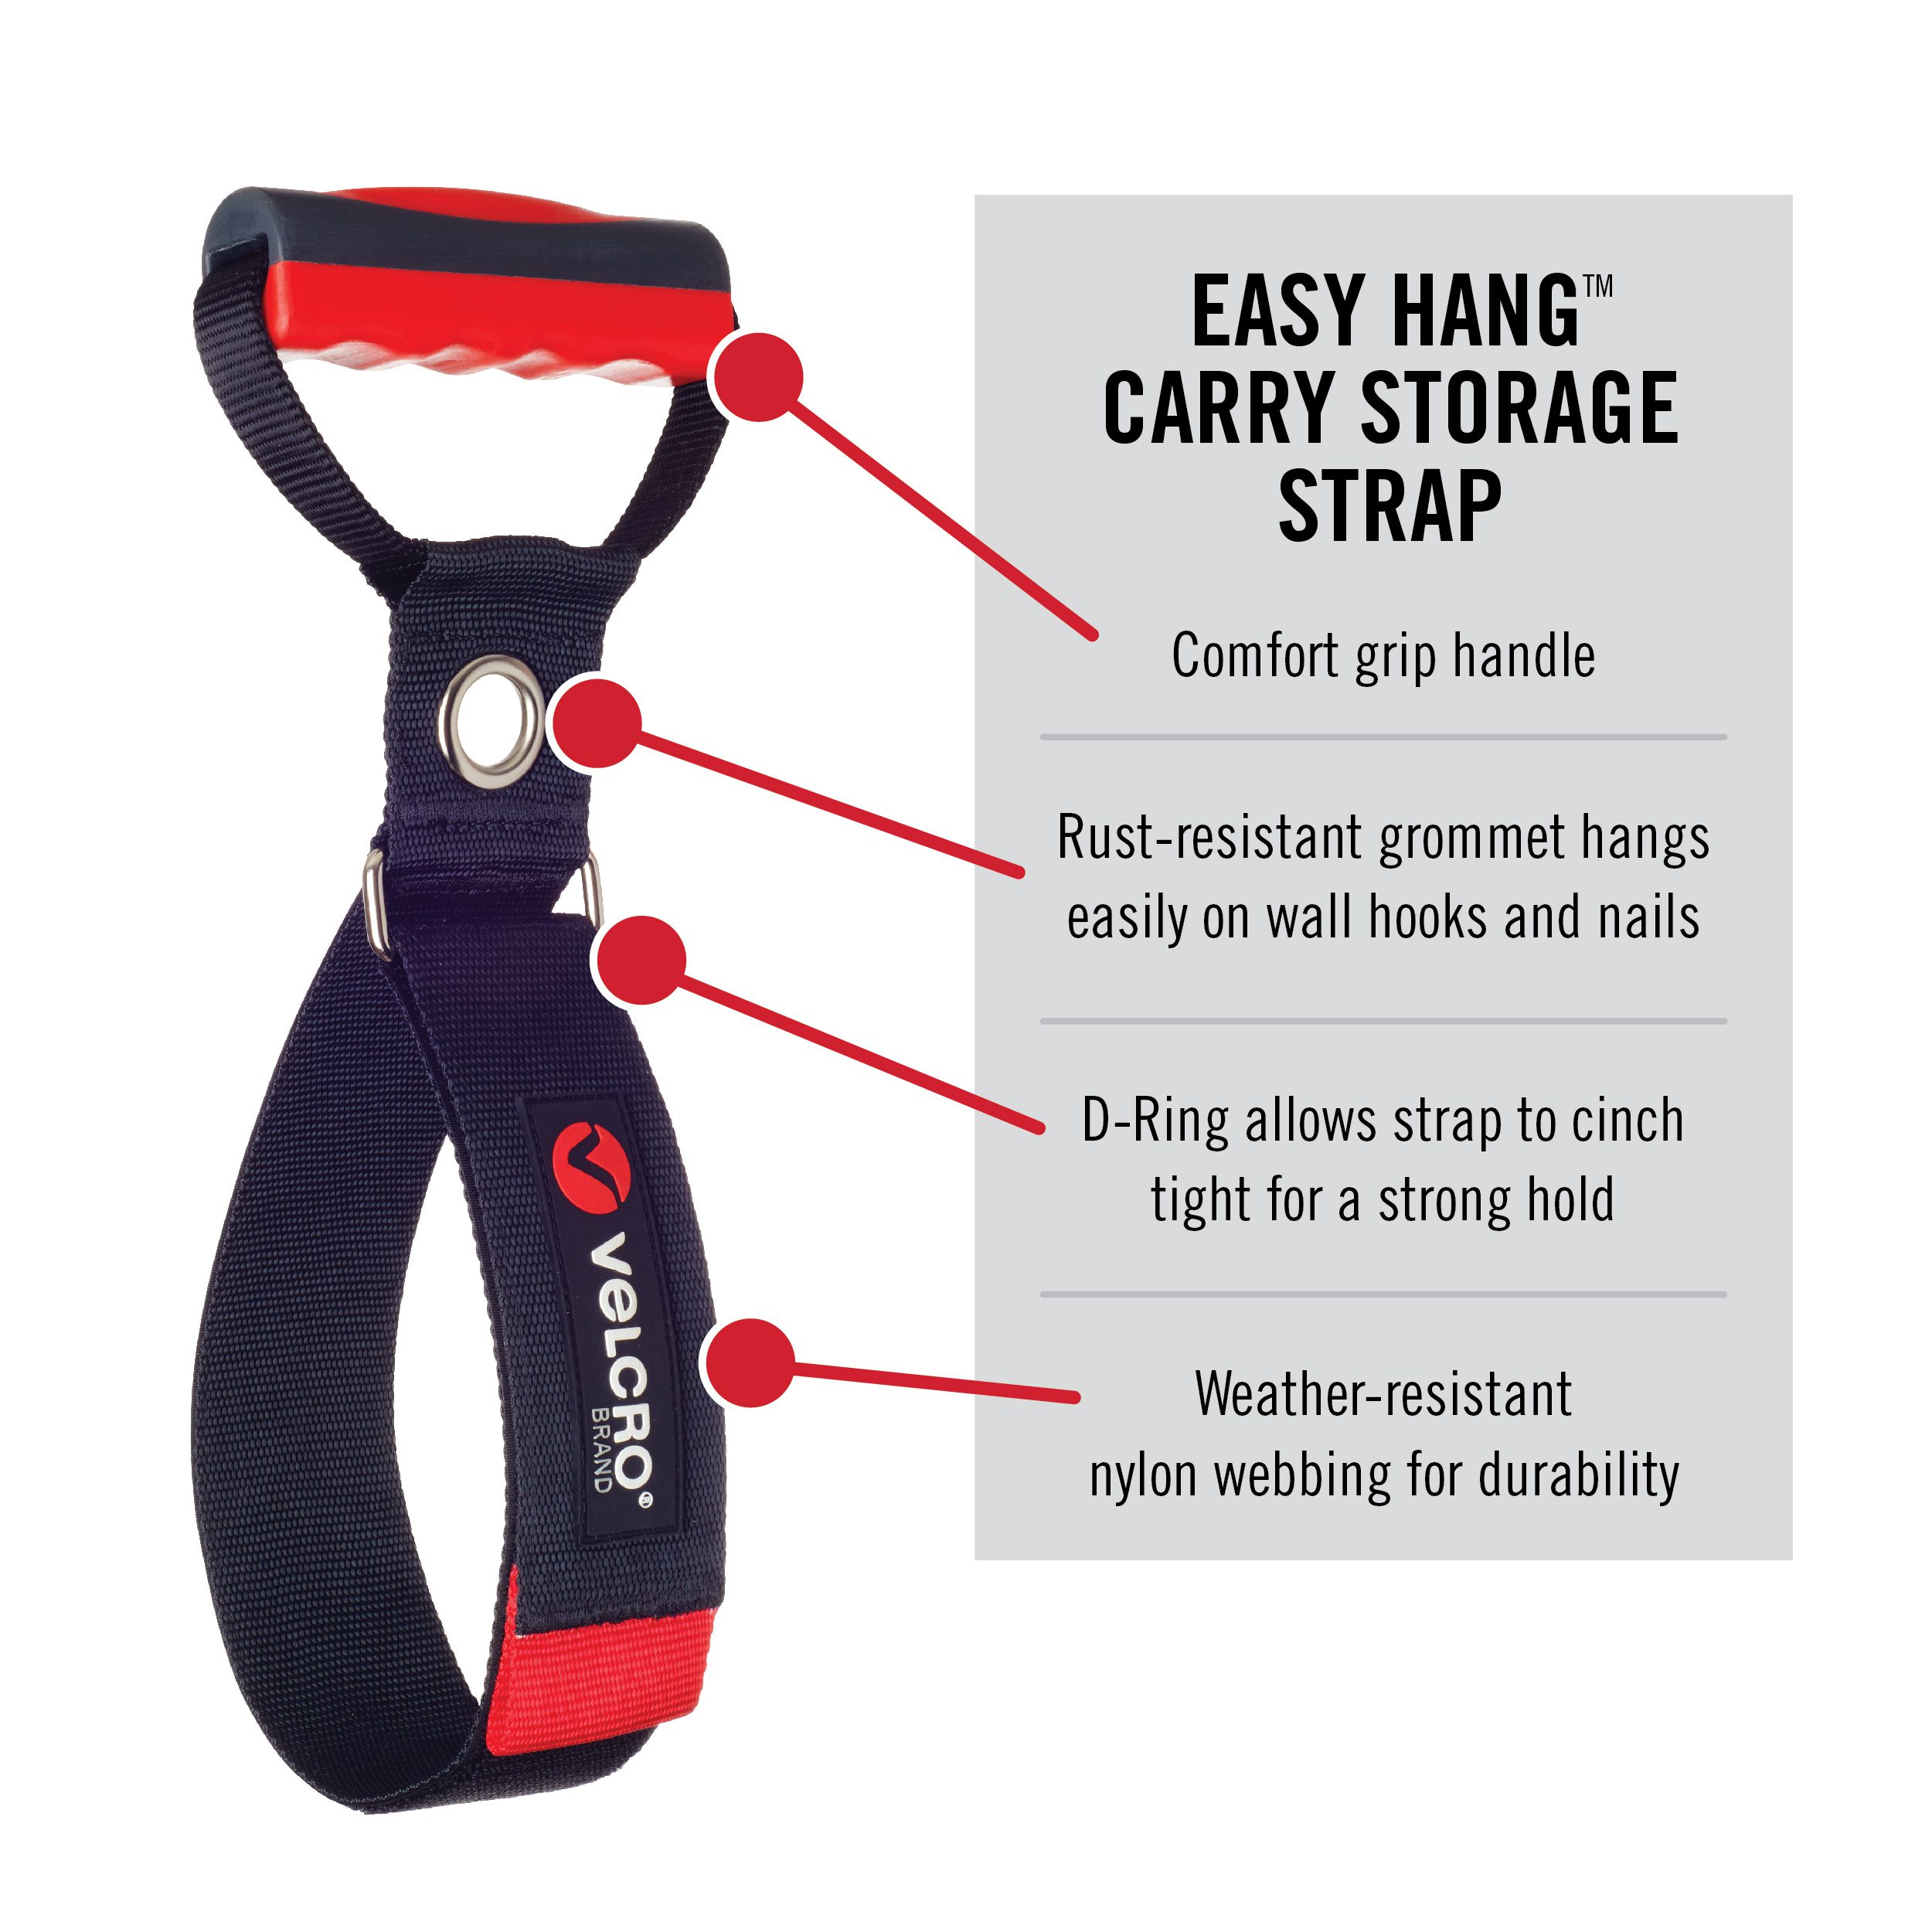 VELCRO® Brand EASY HANG™ Carry Storage Straps with Handle